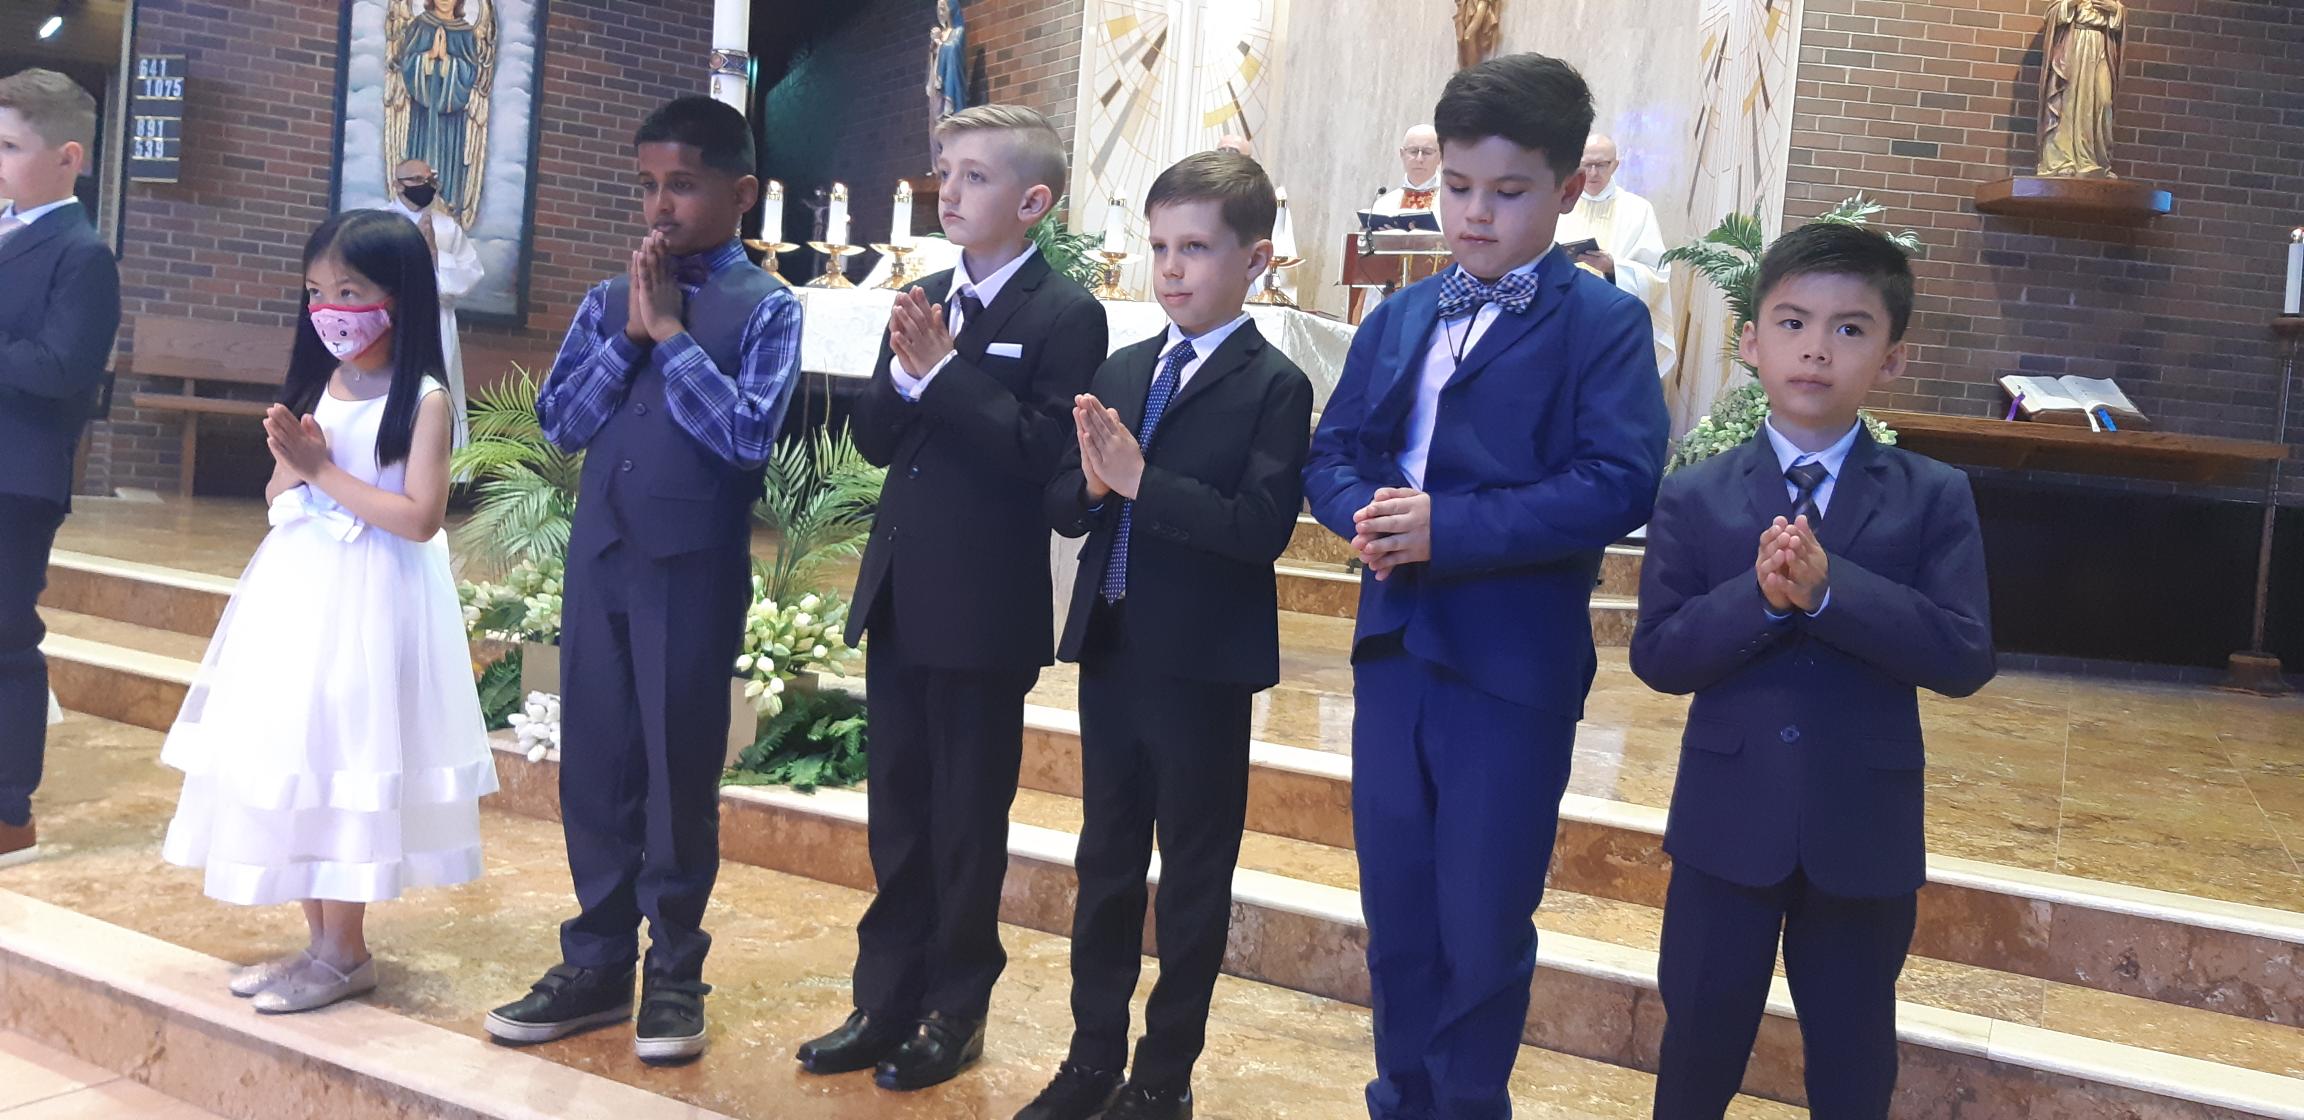 May 14 First Communion Candidates Group 2